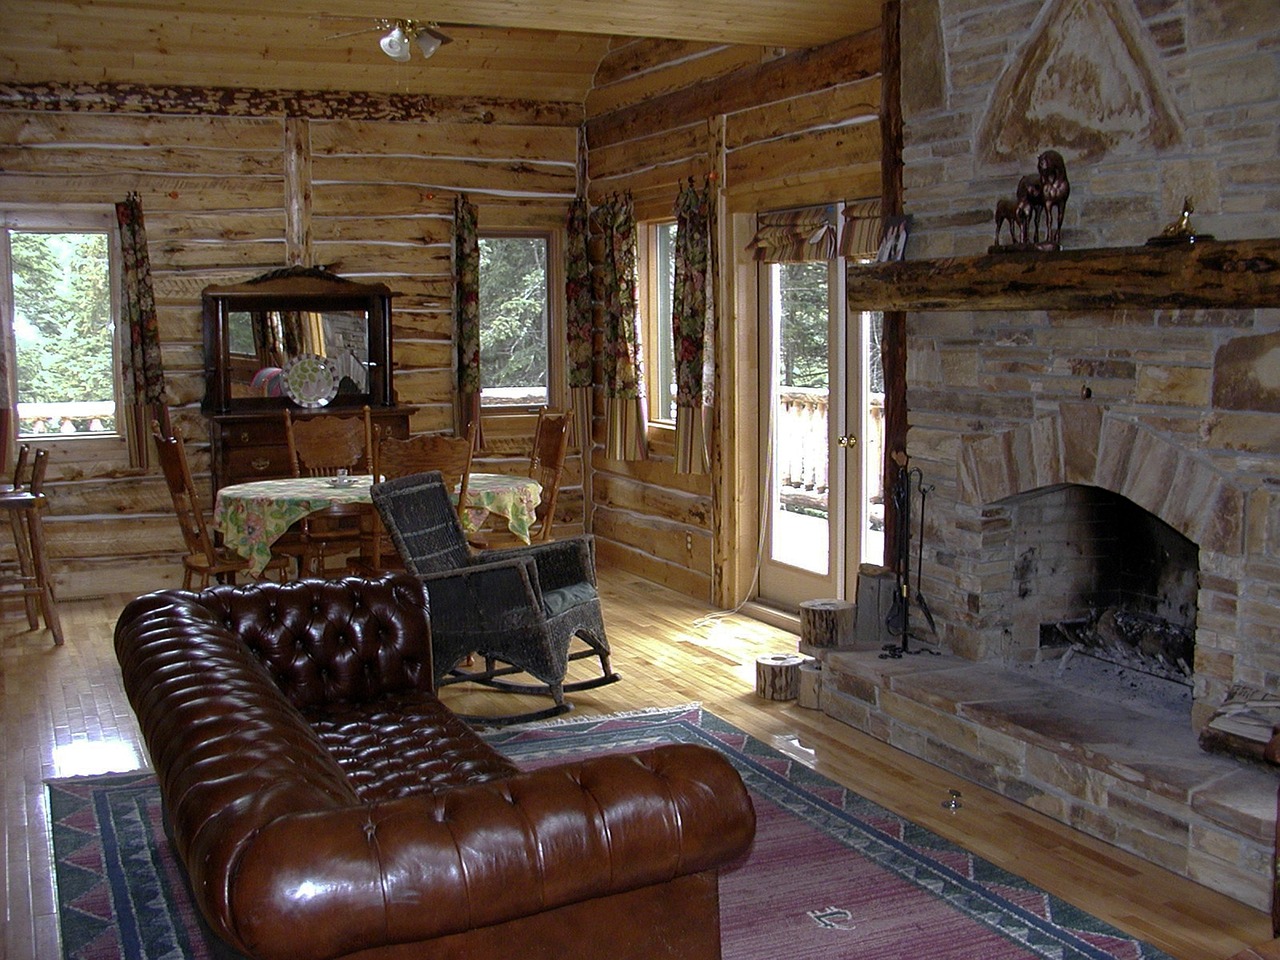 The Right Décor Completes the Log Home Lifestyle